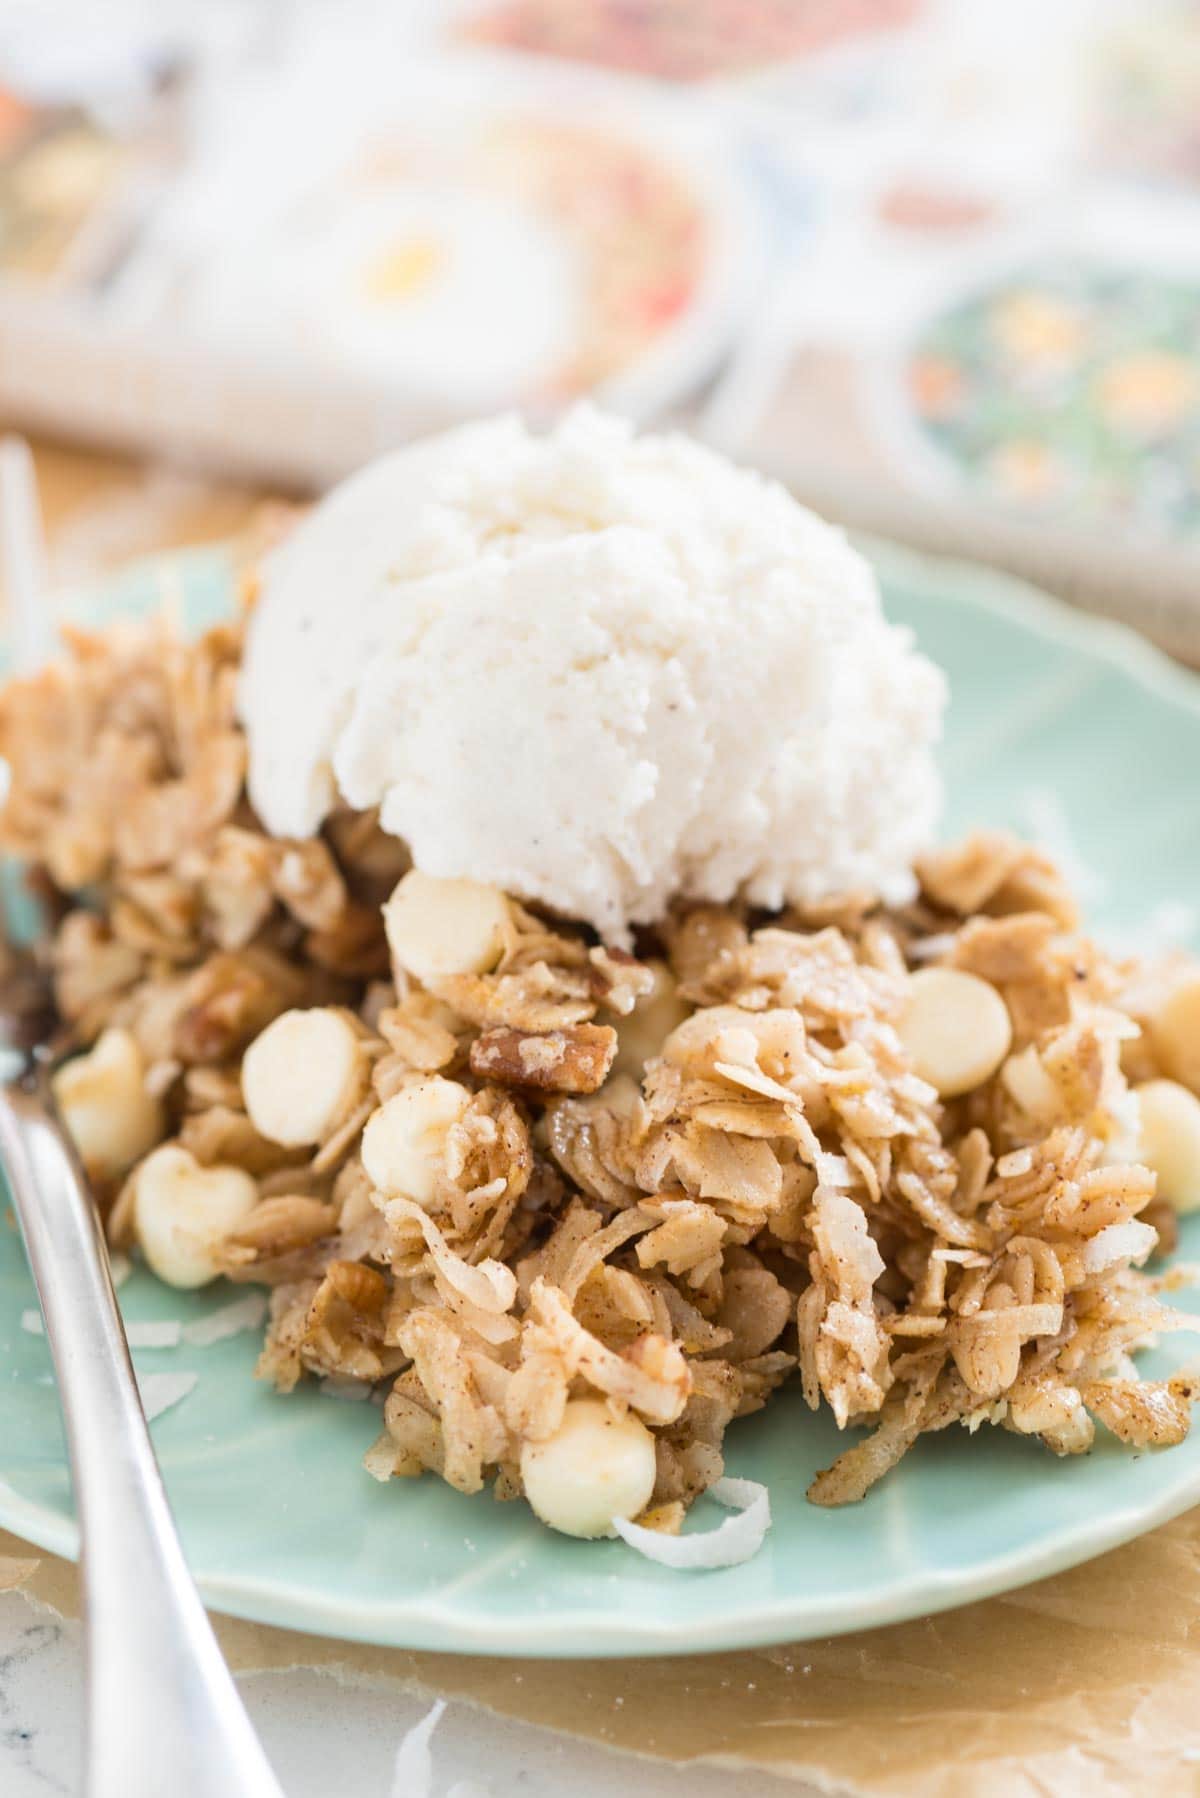 Easy Coconut Lover's Pumpkin Spice Oatmeal Bars - this simple dessert recipe is perfect with ice cream! It's got no flour and is FULL of pumpkin pie spice!